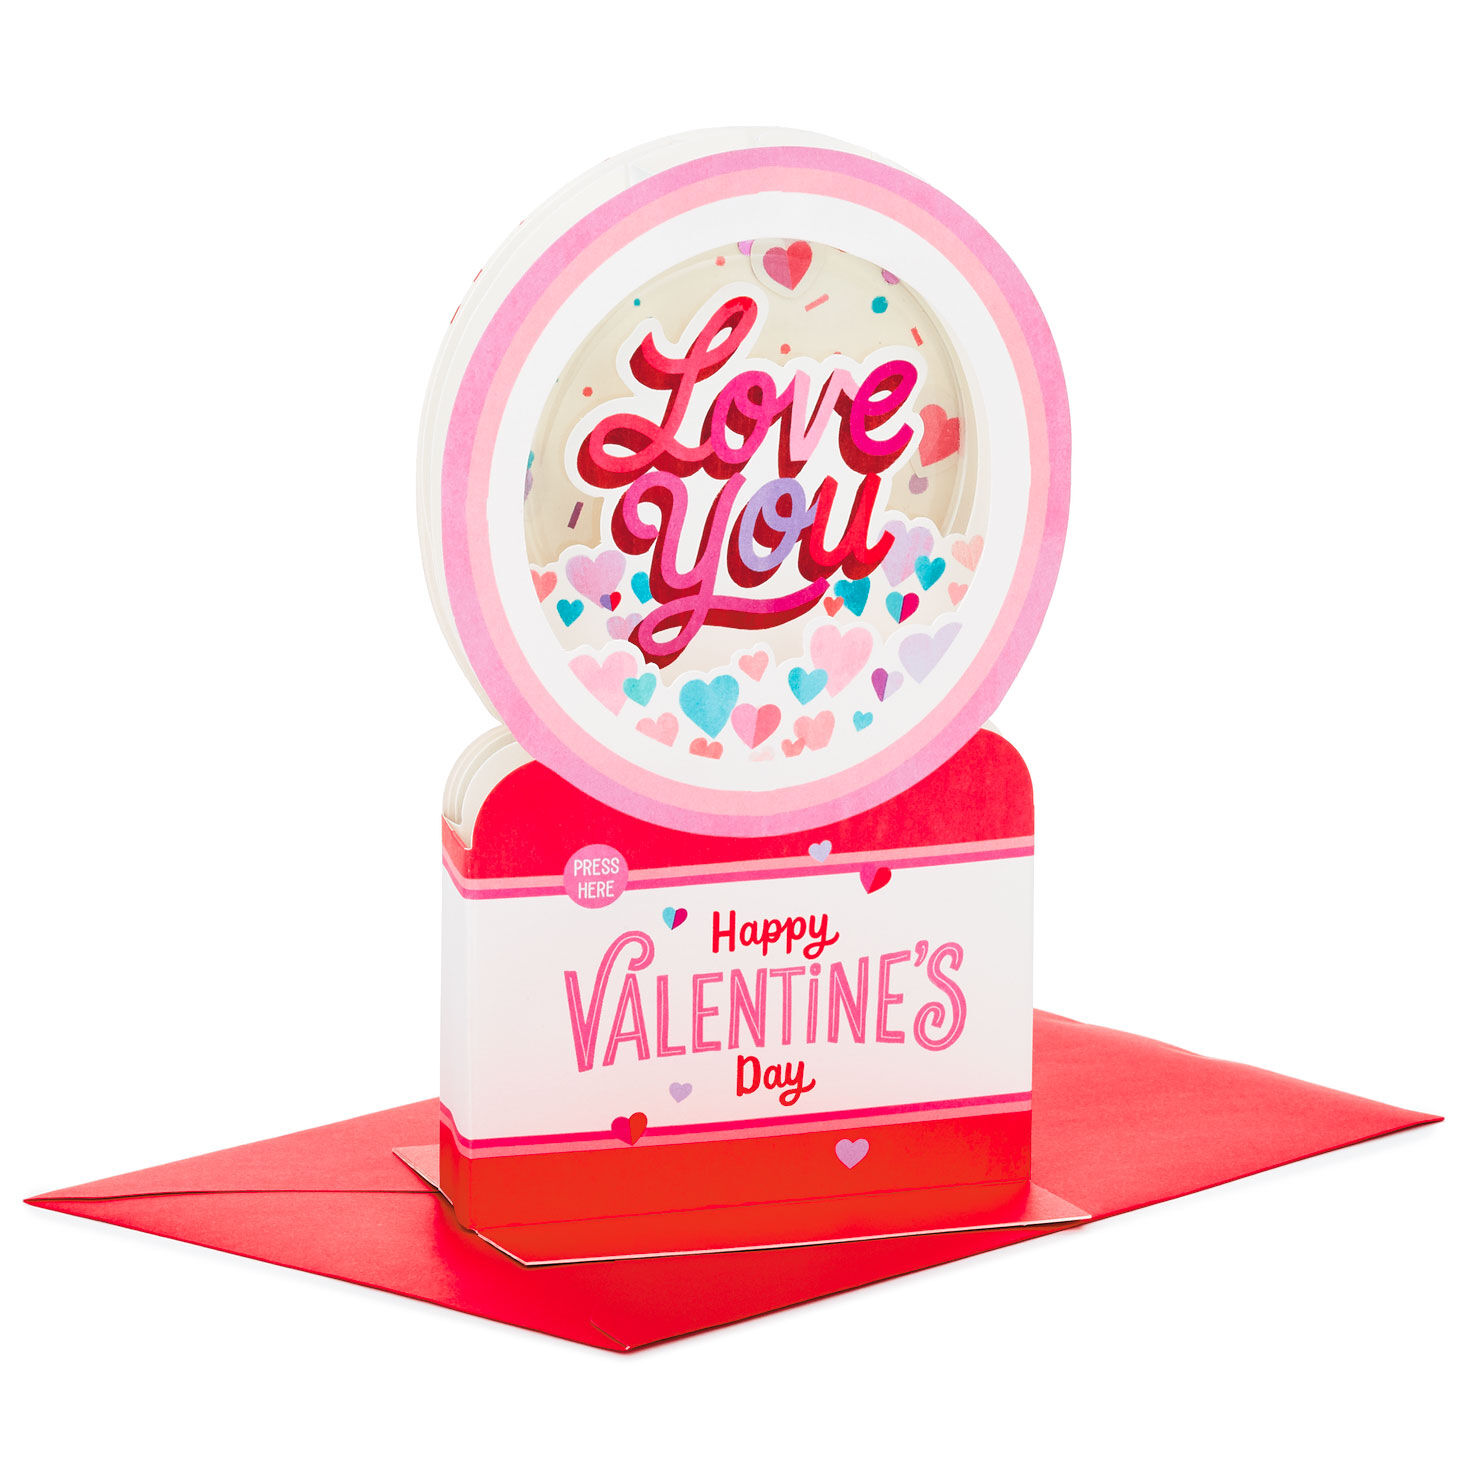 CupCycled™ Hearts Design Valentine Card from Hallmark 